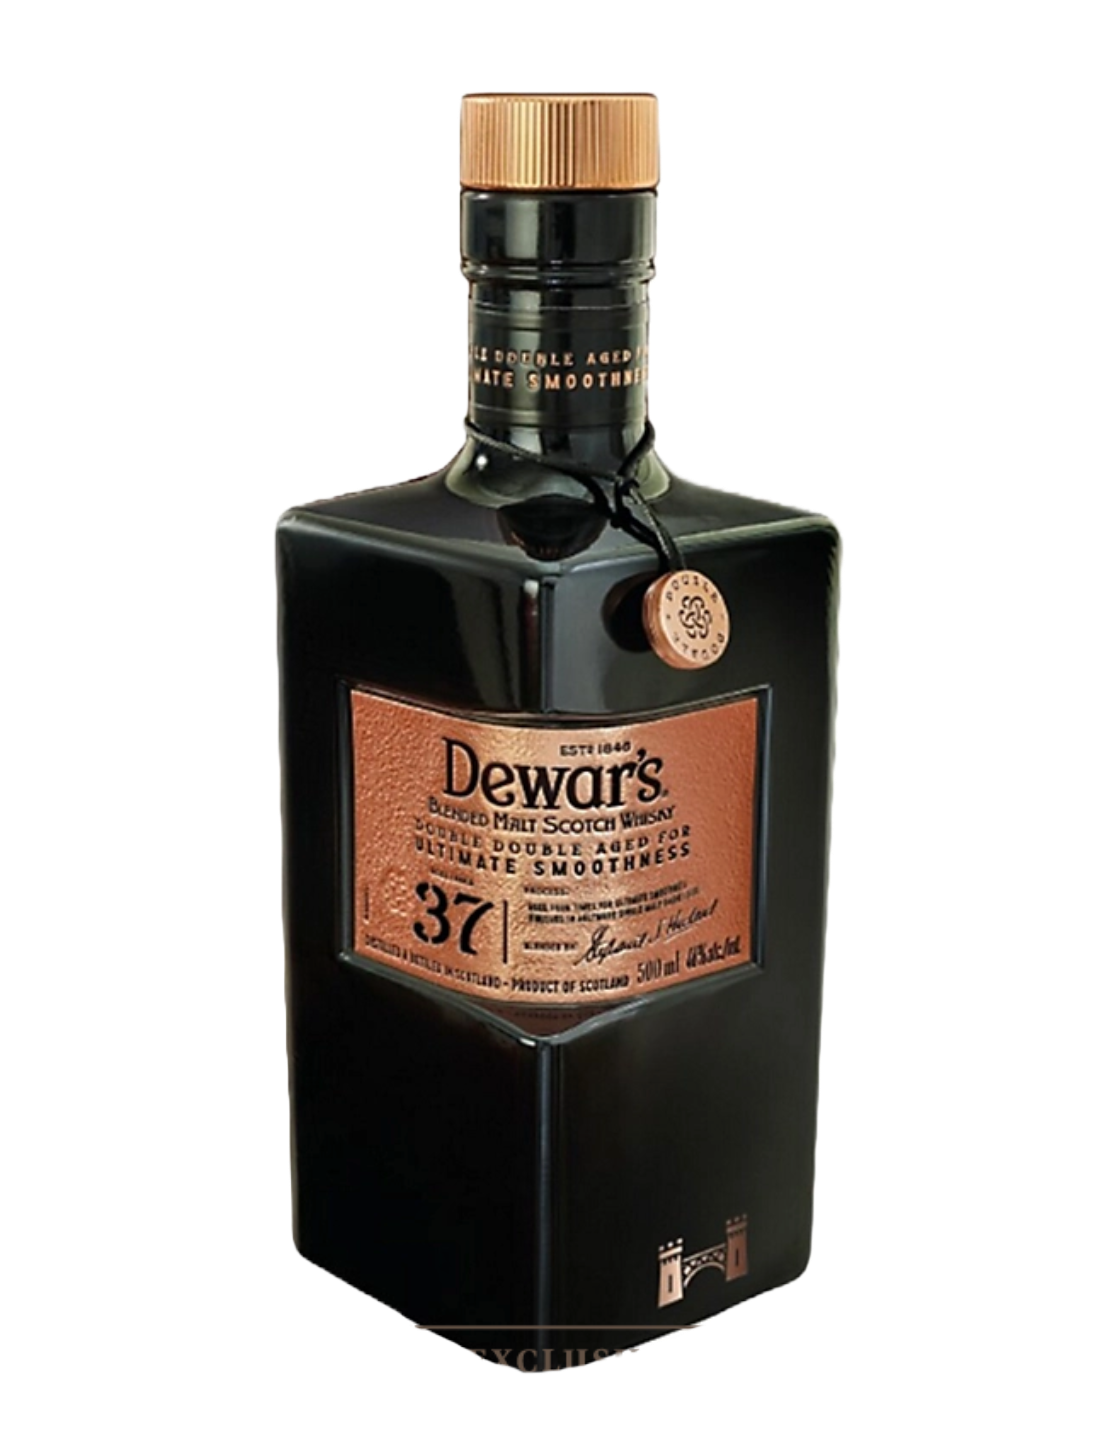 An elegant bottle of Dewars Double Double 37 in front of a plain white background